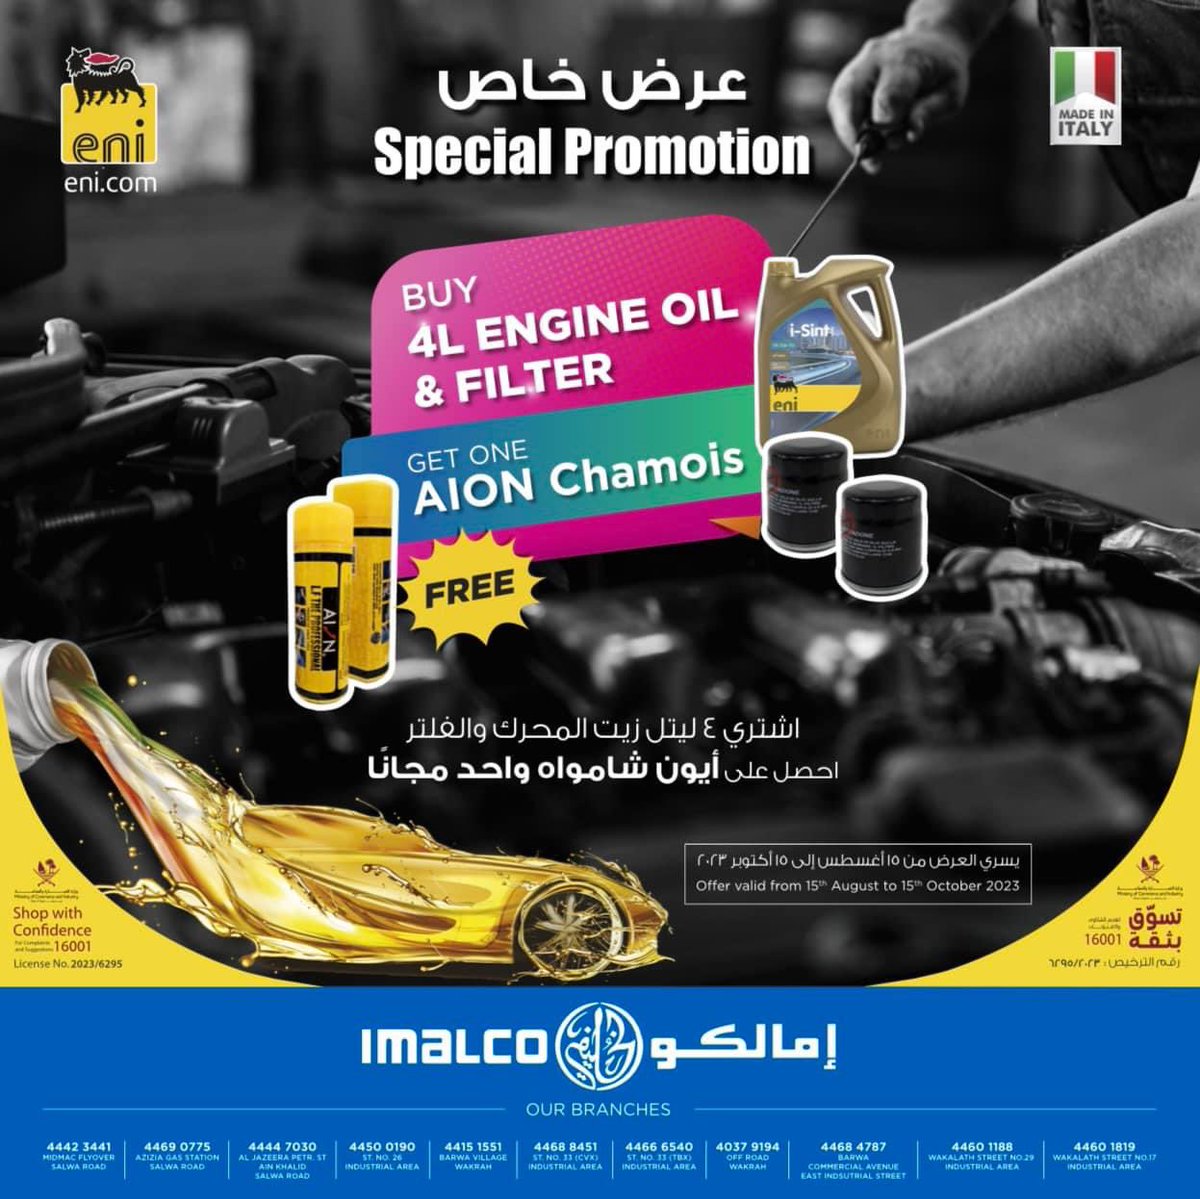 ENI Lubricants SPECIAL PROMOTION 🇮🇹 

Purchase any 4 Litres of engine oil & filter to get a FREE Chamois Leather from AION 🇯🇵 
•
•
•
#chamois #aion #online #specialpromotion #promotion #doha #qatar #eni #lubricants #vehicles #oil #oilchange #offroad #4x4 #free #promotion #gift